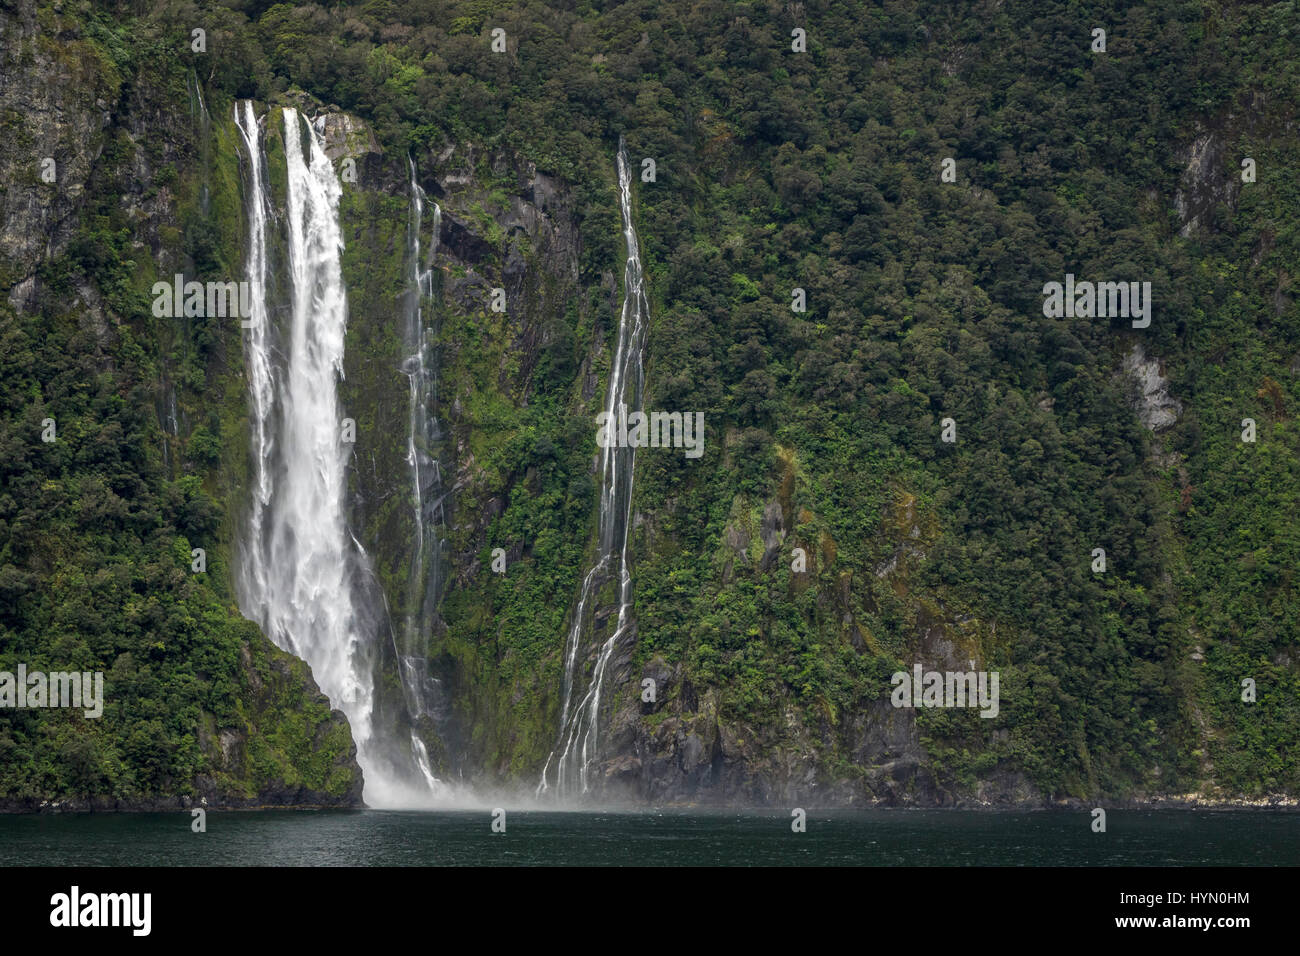 A Waterfall On A Cliff In Milford Sound After Heavy Rain Milford Sound Is A Fiord Part Of Fiordland On New Zealand South Island, Stock Photo